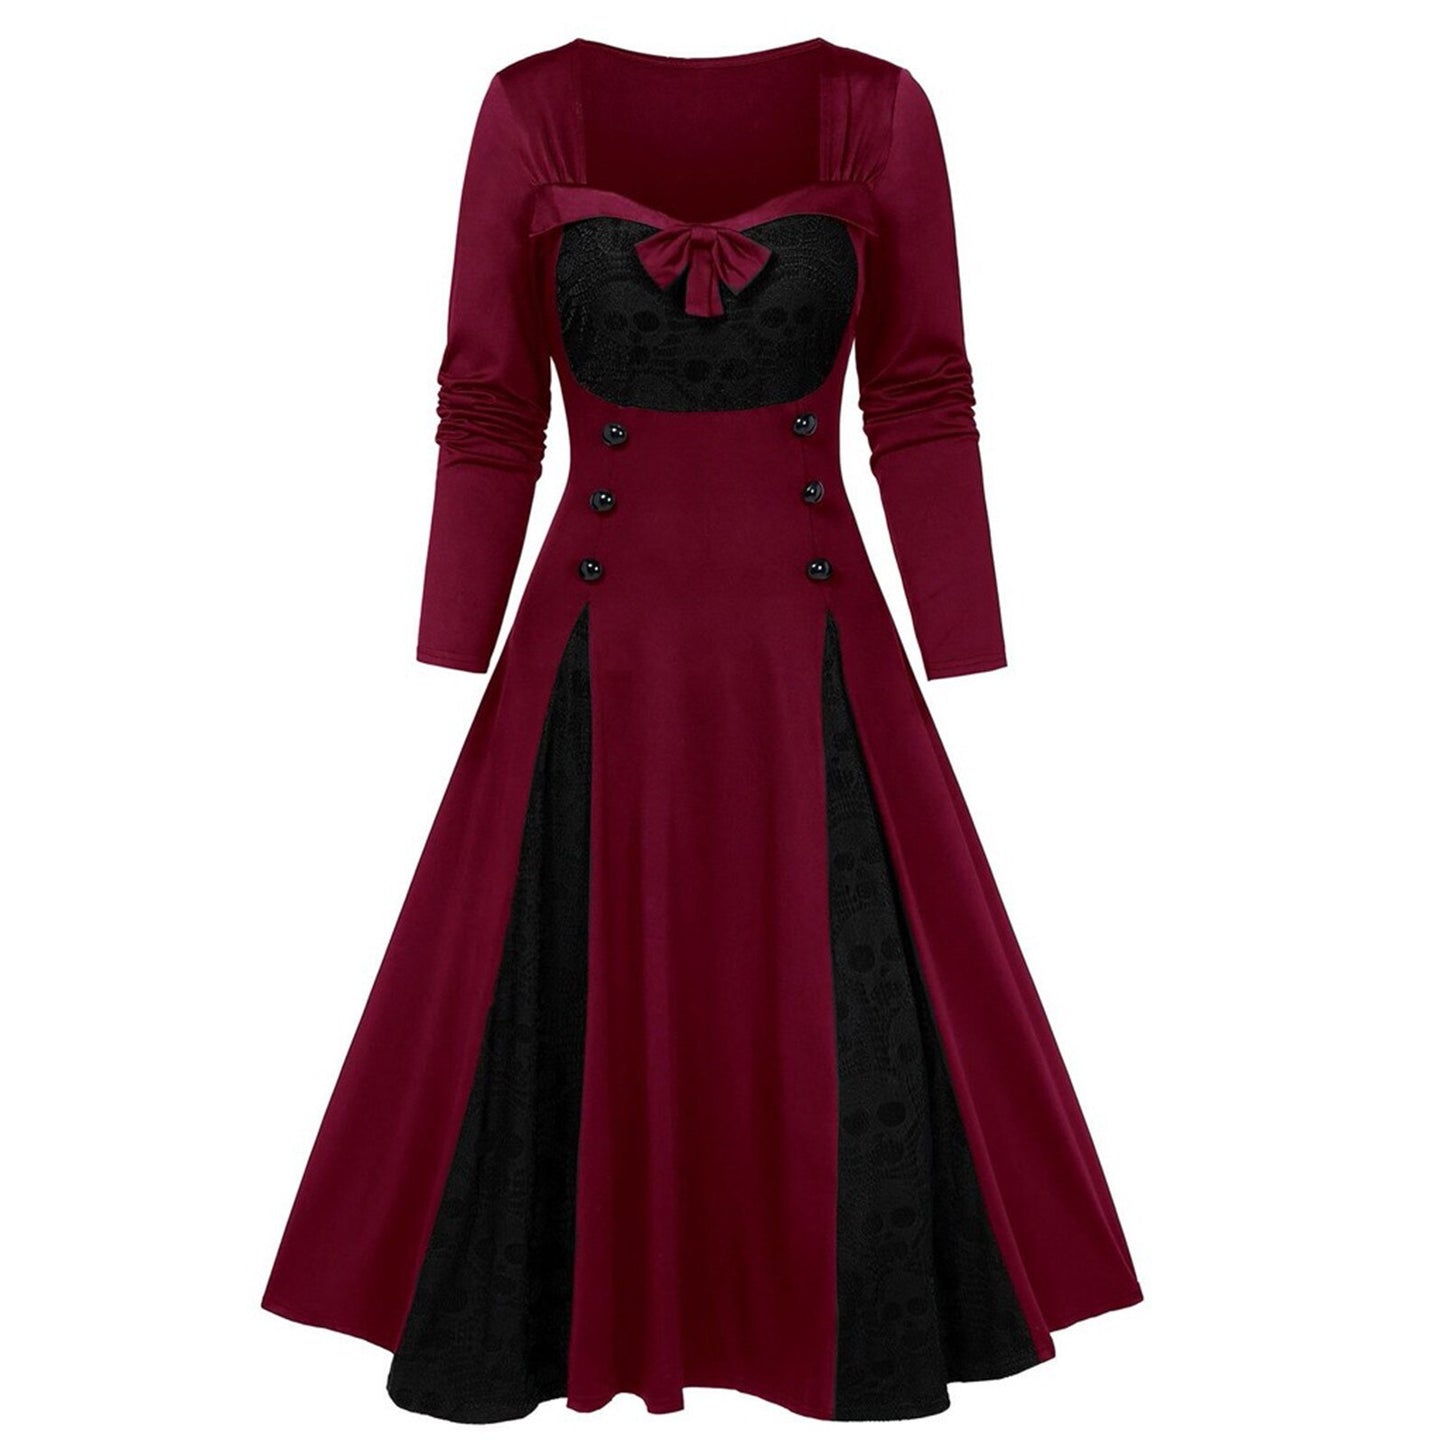 Halloween Gothic Pin Up Midi Dress Women Plus-size Solid Color Skull Lace Splicing Long Sleeve Vintage Party Dress Vestidos